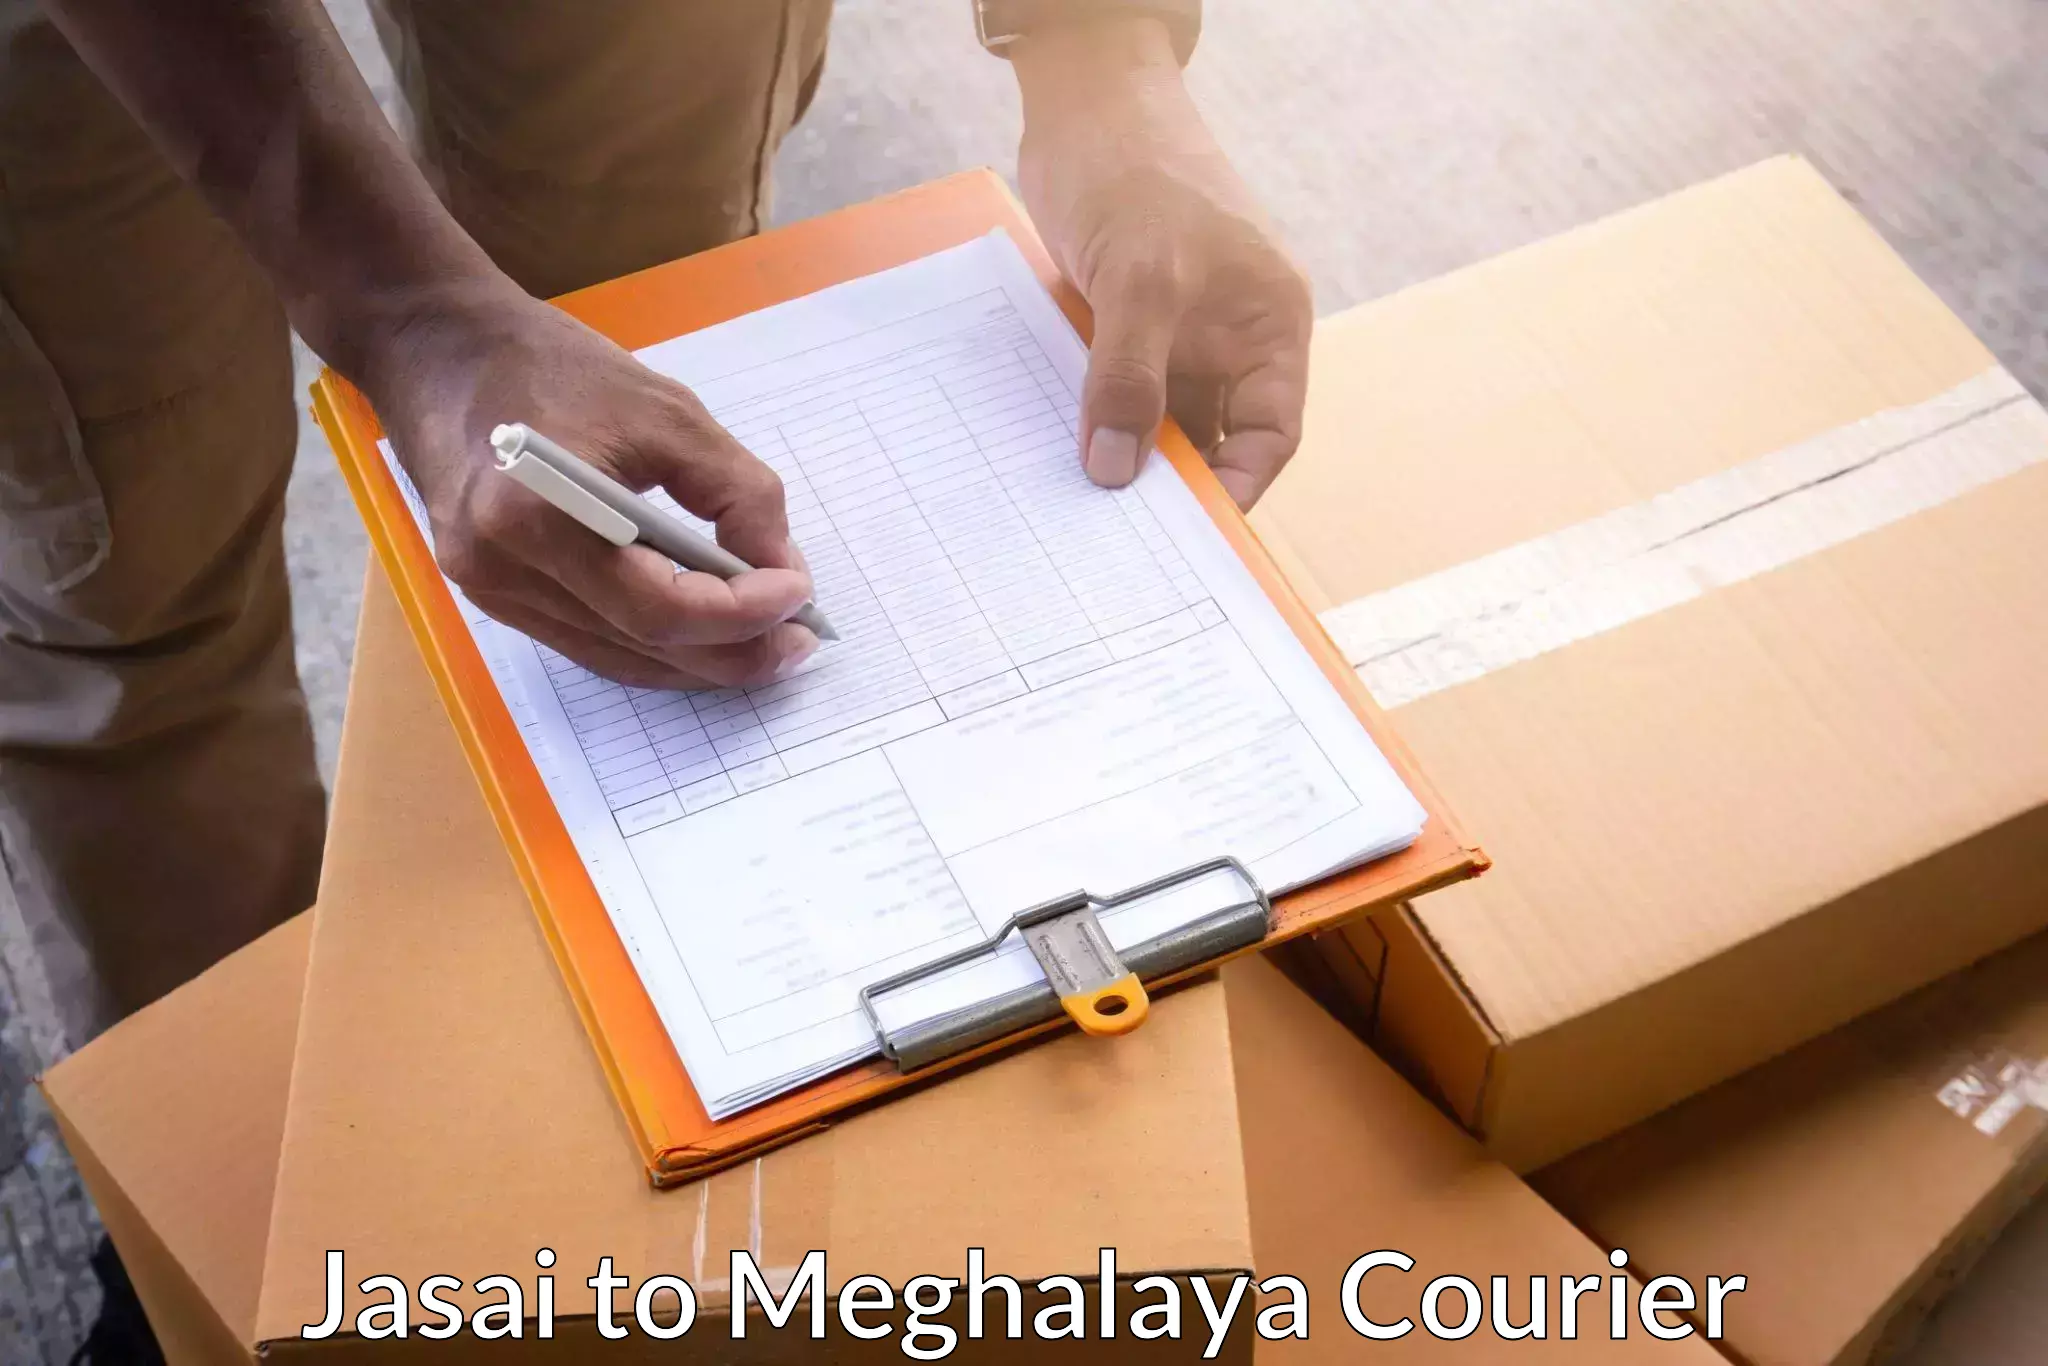 Overnight delivery services Jasai to Meghalaya